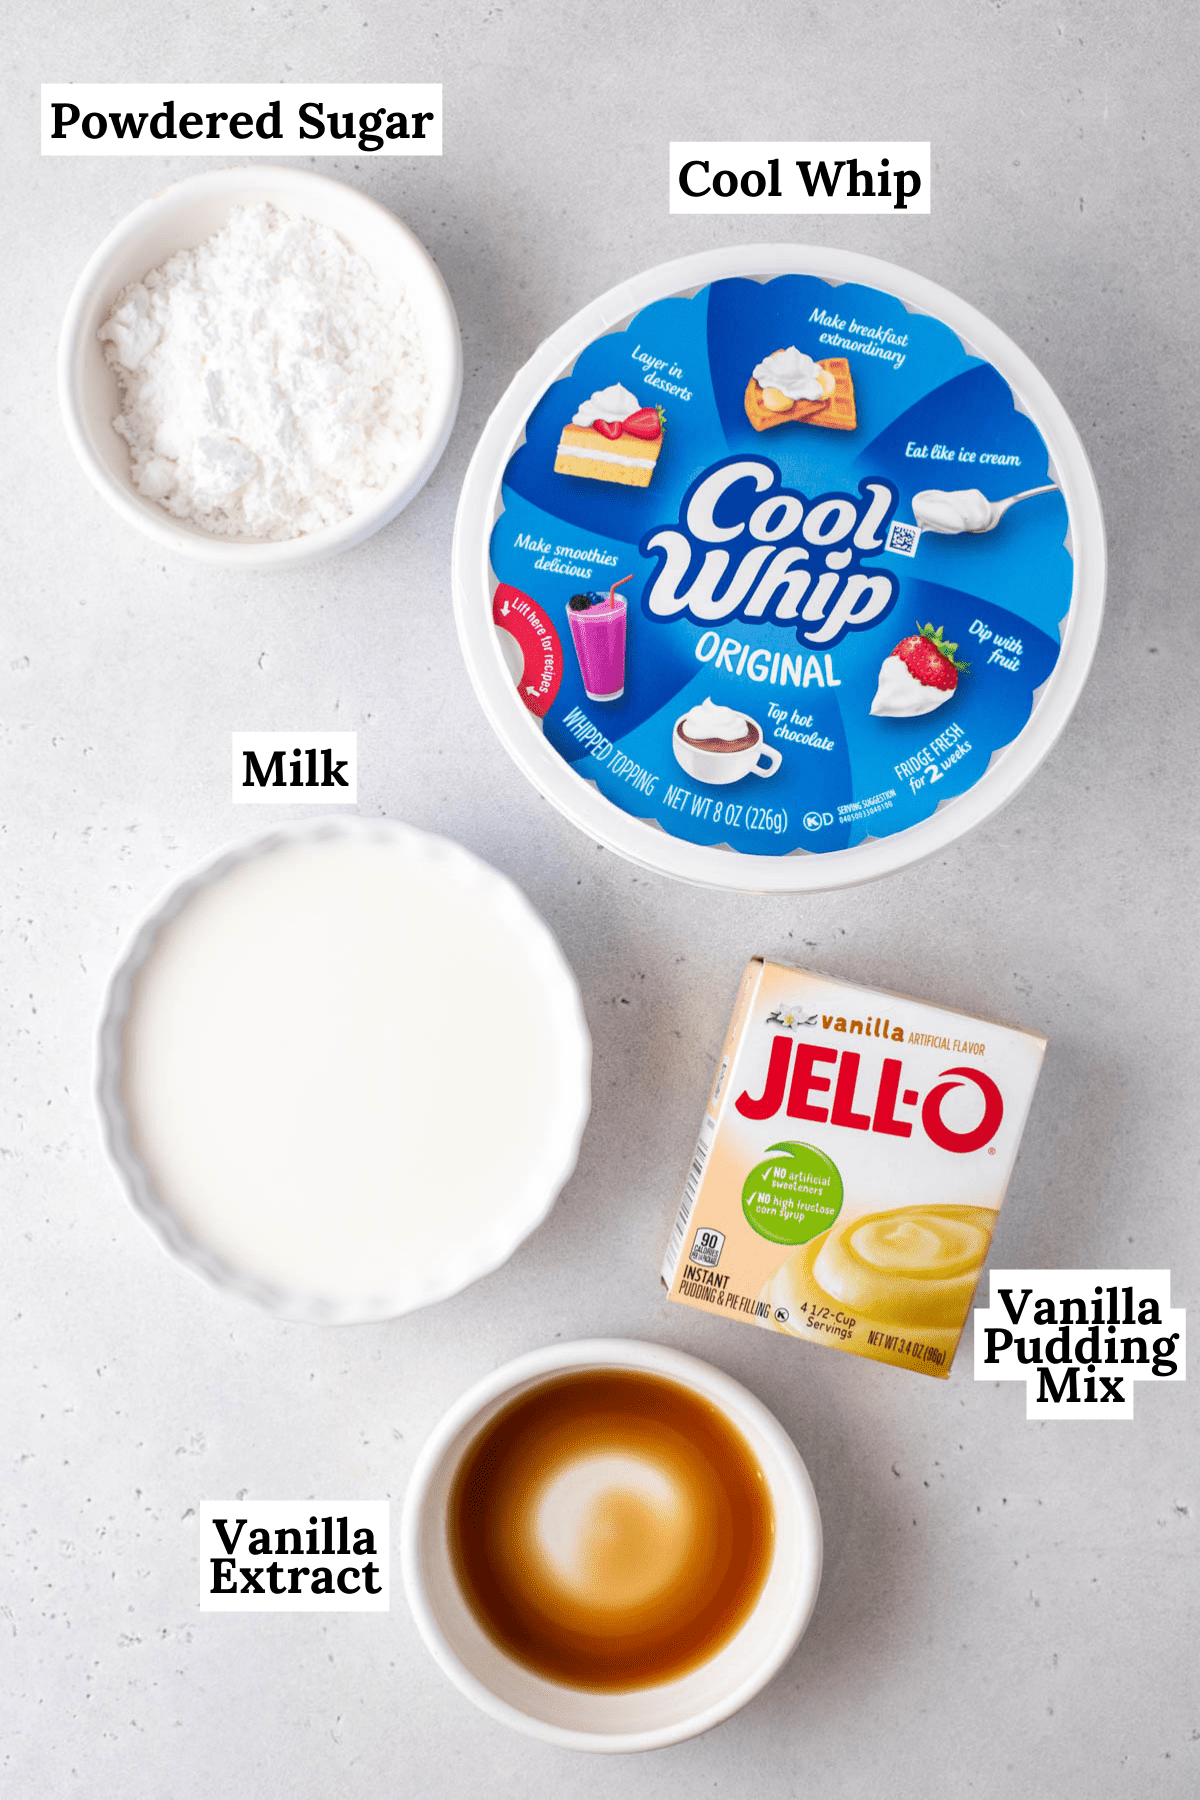 ingredients for cool whip frosting including vanilla extract, powdered sugar, a tub of cool whip, milk, and a box of vanilla pudding mix